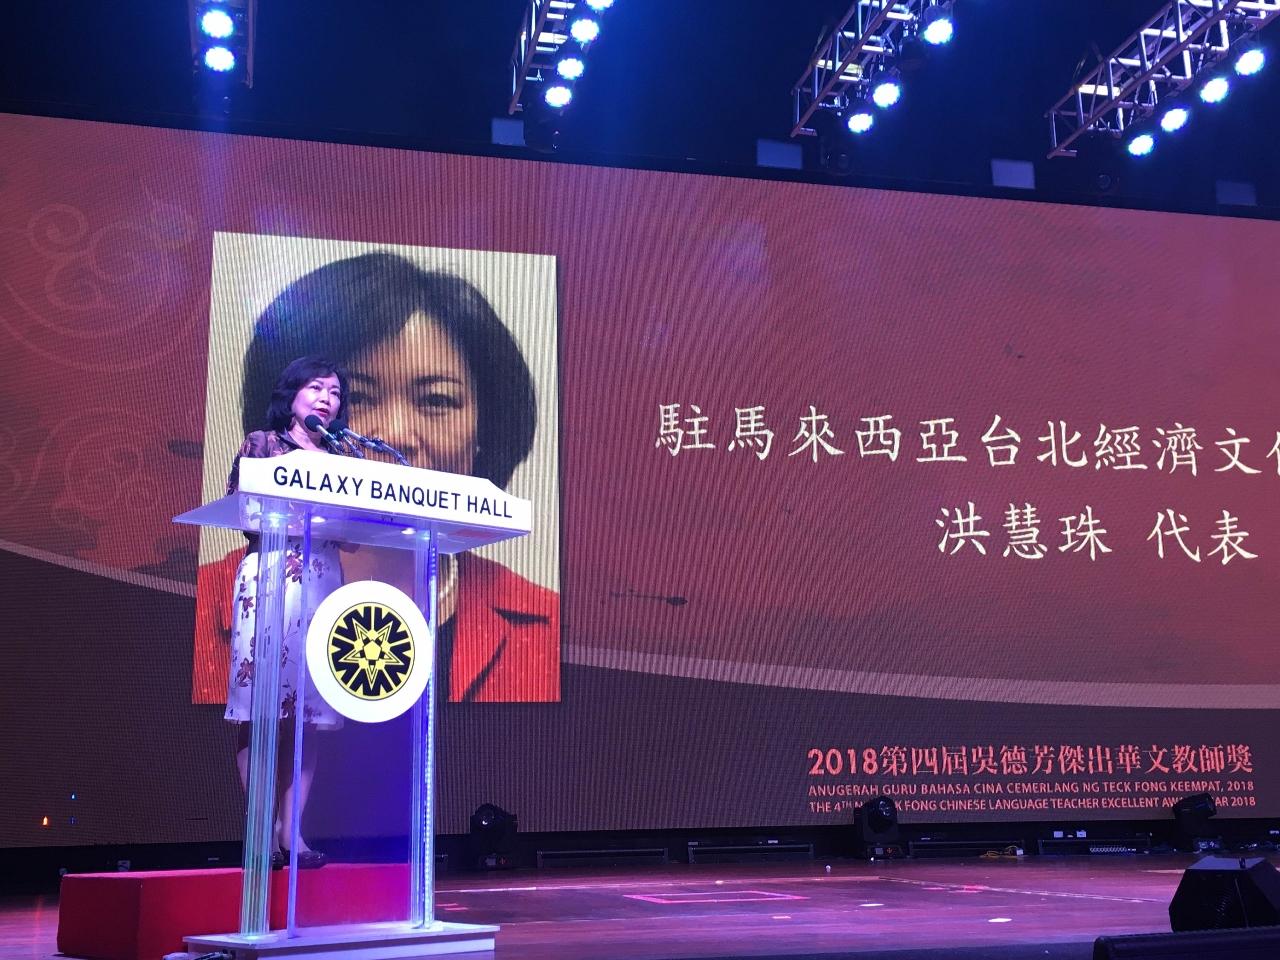 Representative Anne Hung delivers a speech at The 4th Ng Teck Fong Excellent Chinese Language Teacher Award Year 2018.